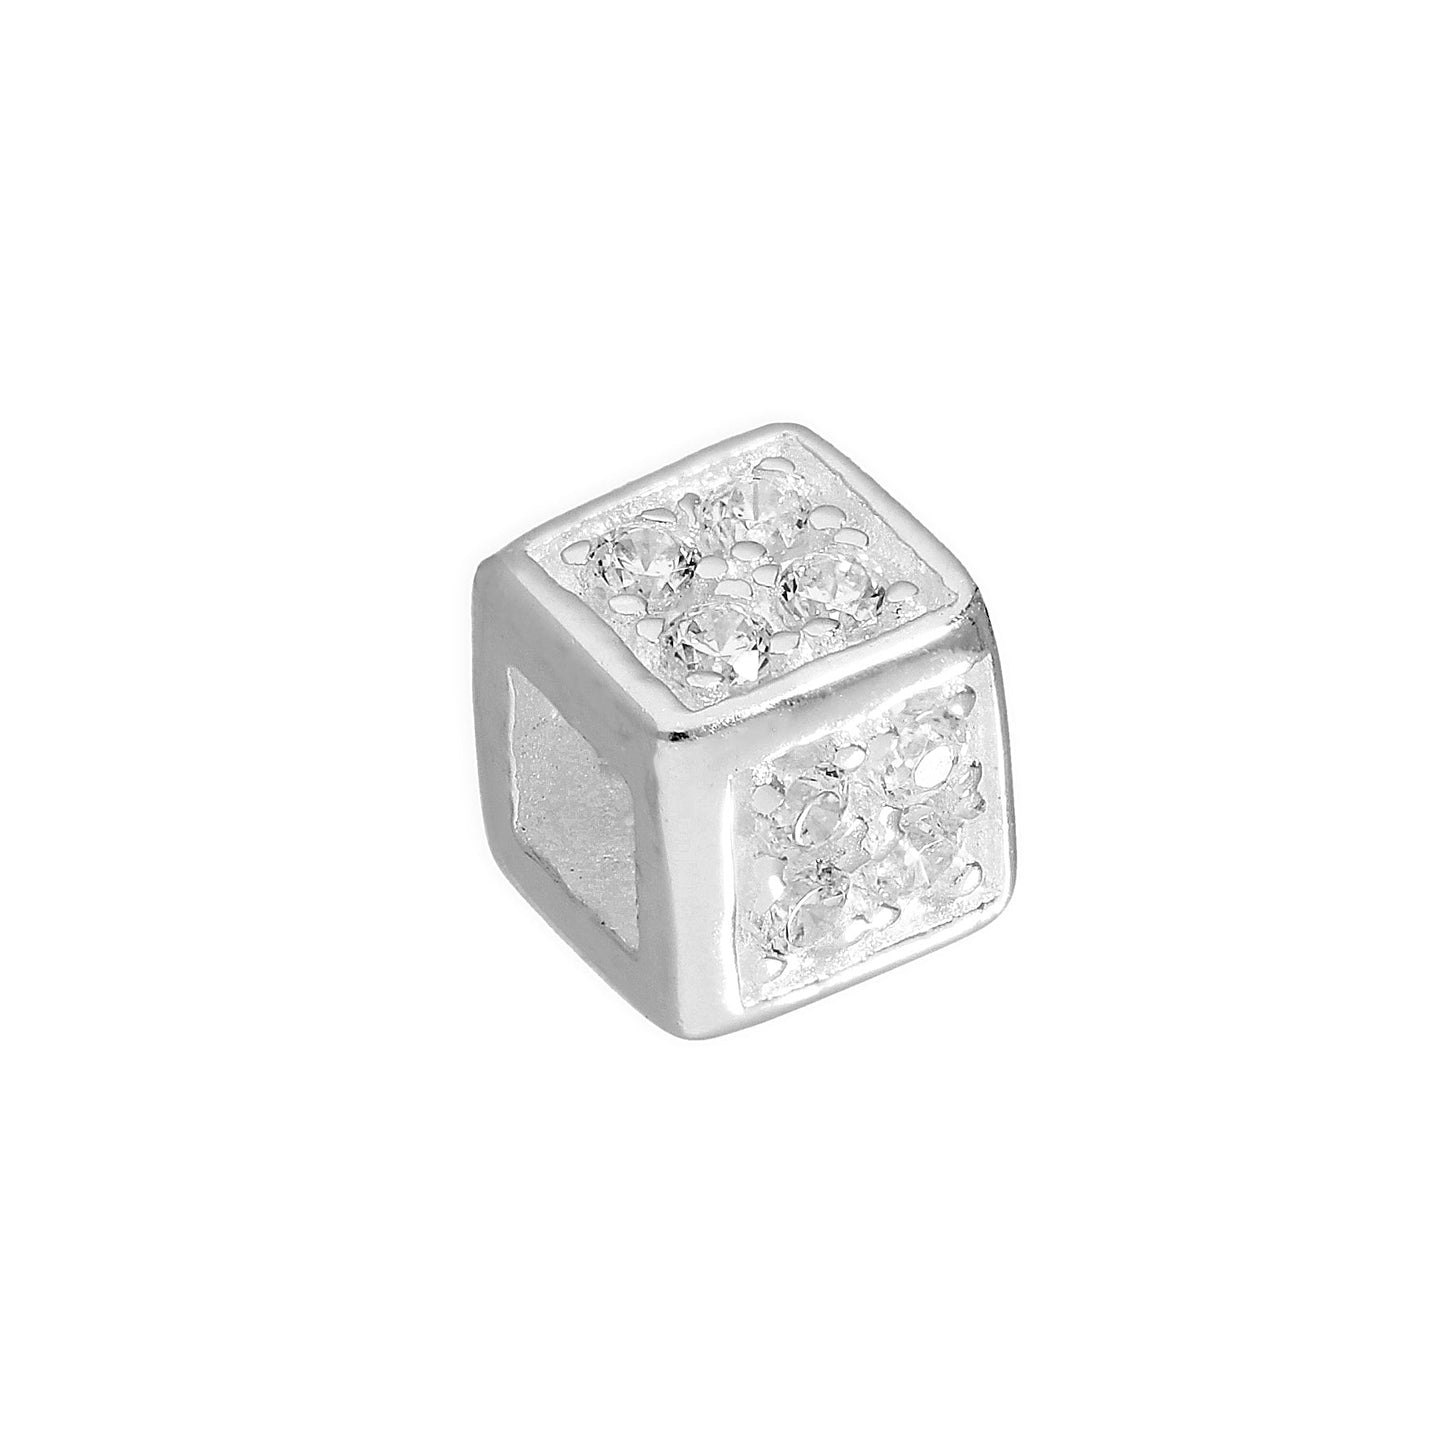 Sterling Silver & Clear CZ Crystal Cube Bead Charm